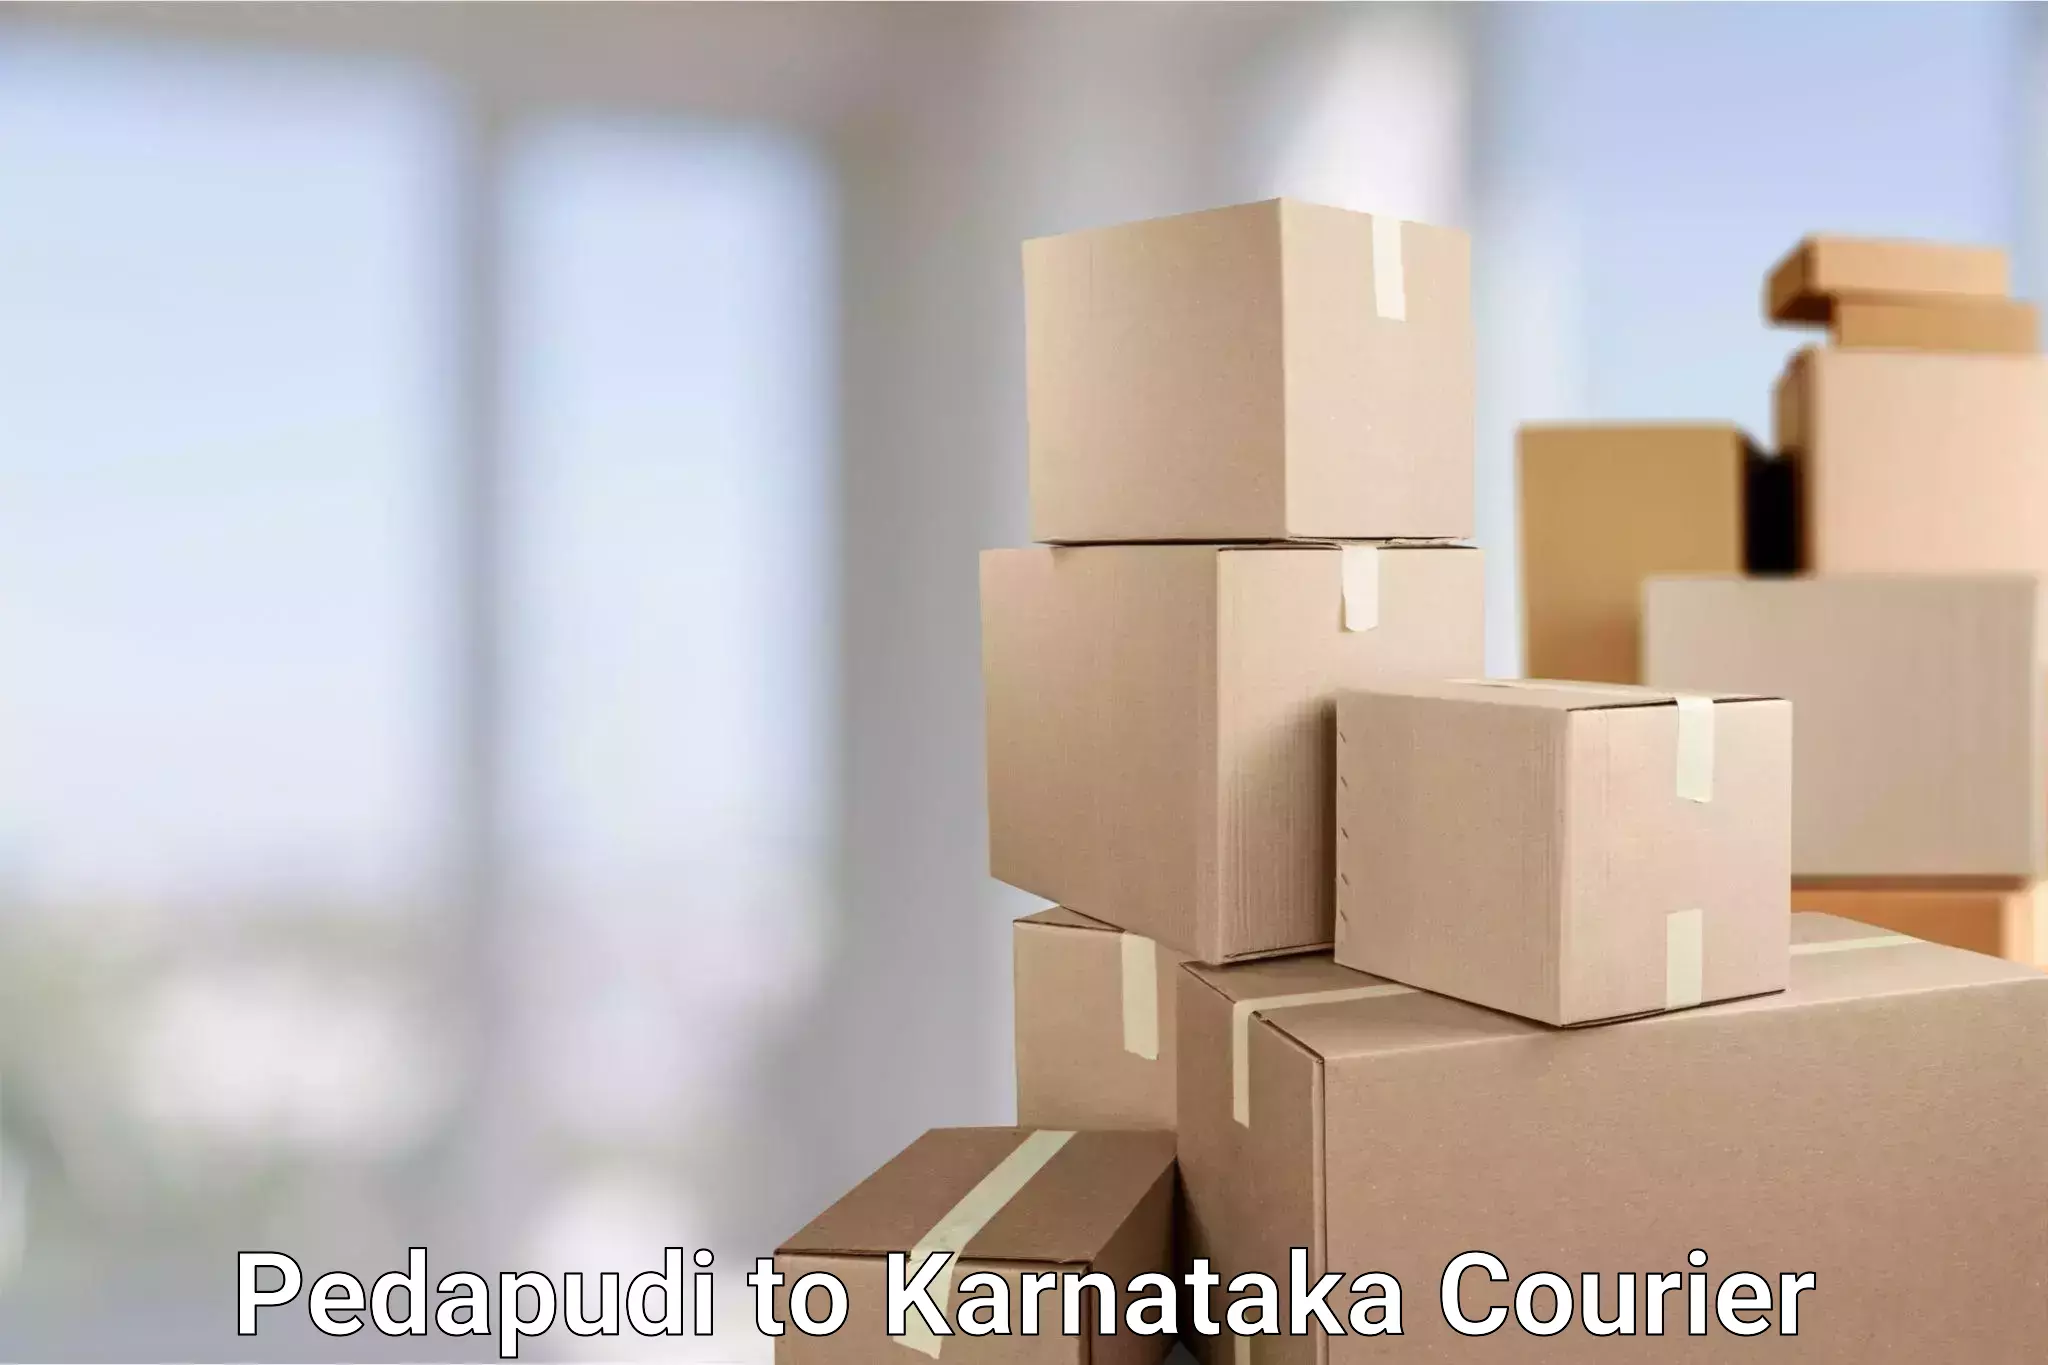 Parcel delivery automation Pedapudi to Karnataka